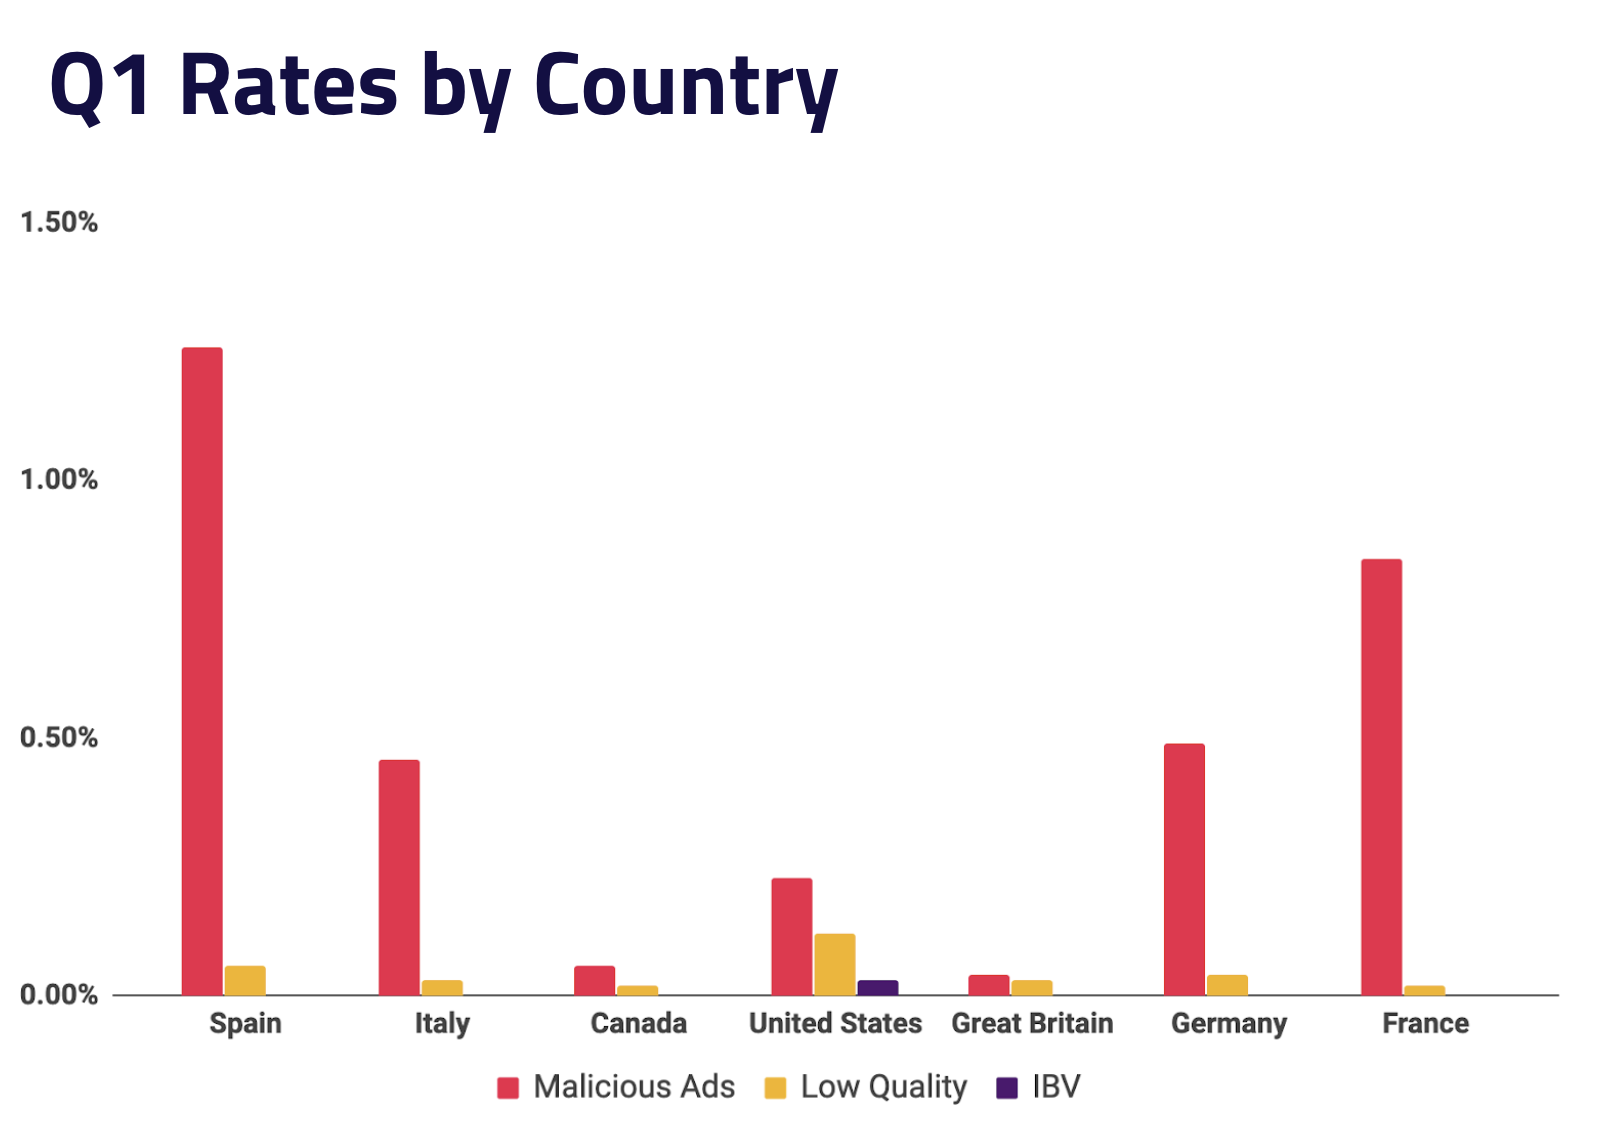 Q1 malicious ad rates by country